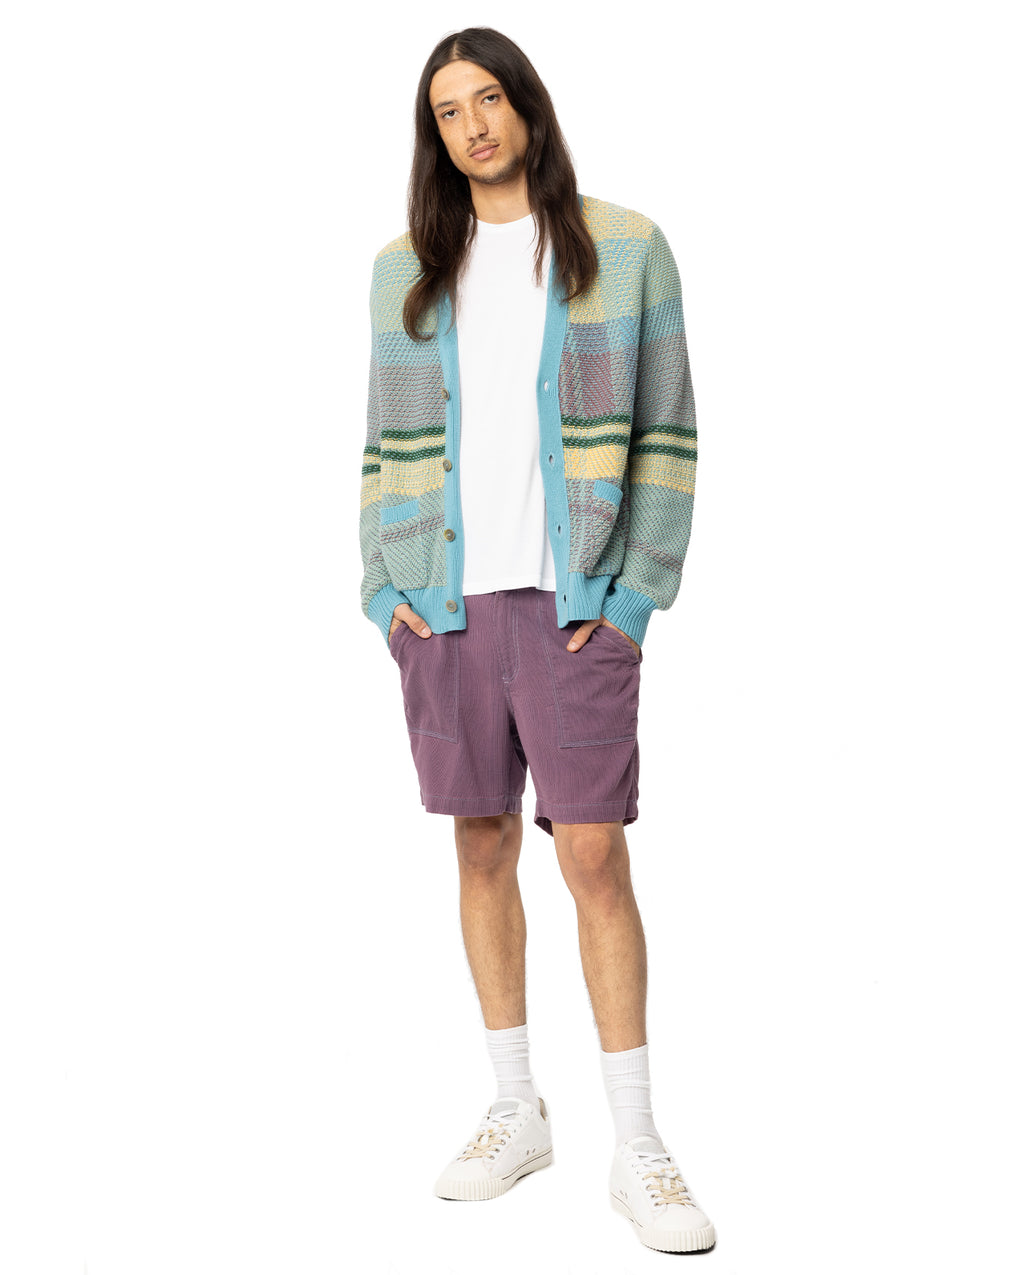 Man standing in purple shorts with a plain white tee under a teal, green and yellow cardigan. 